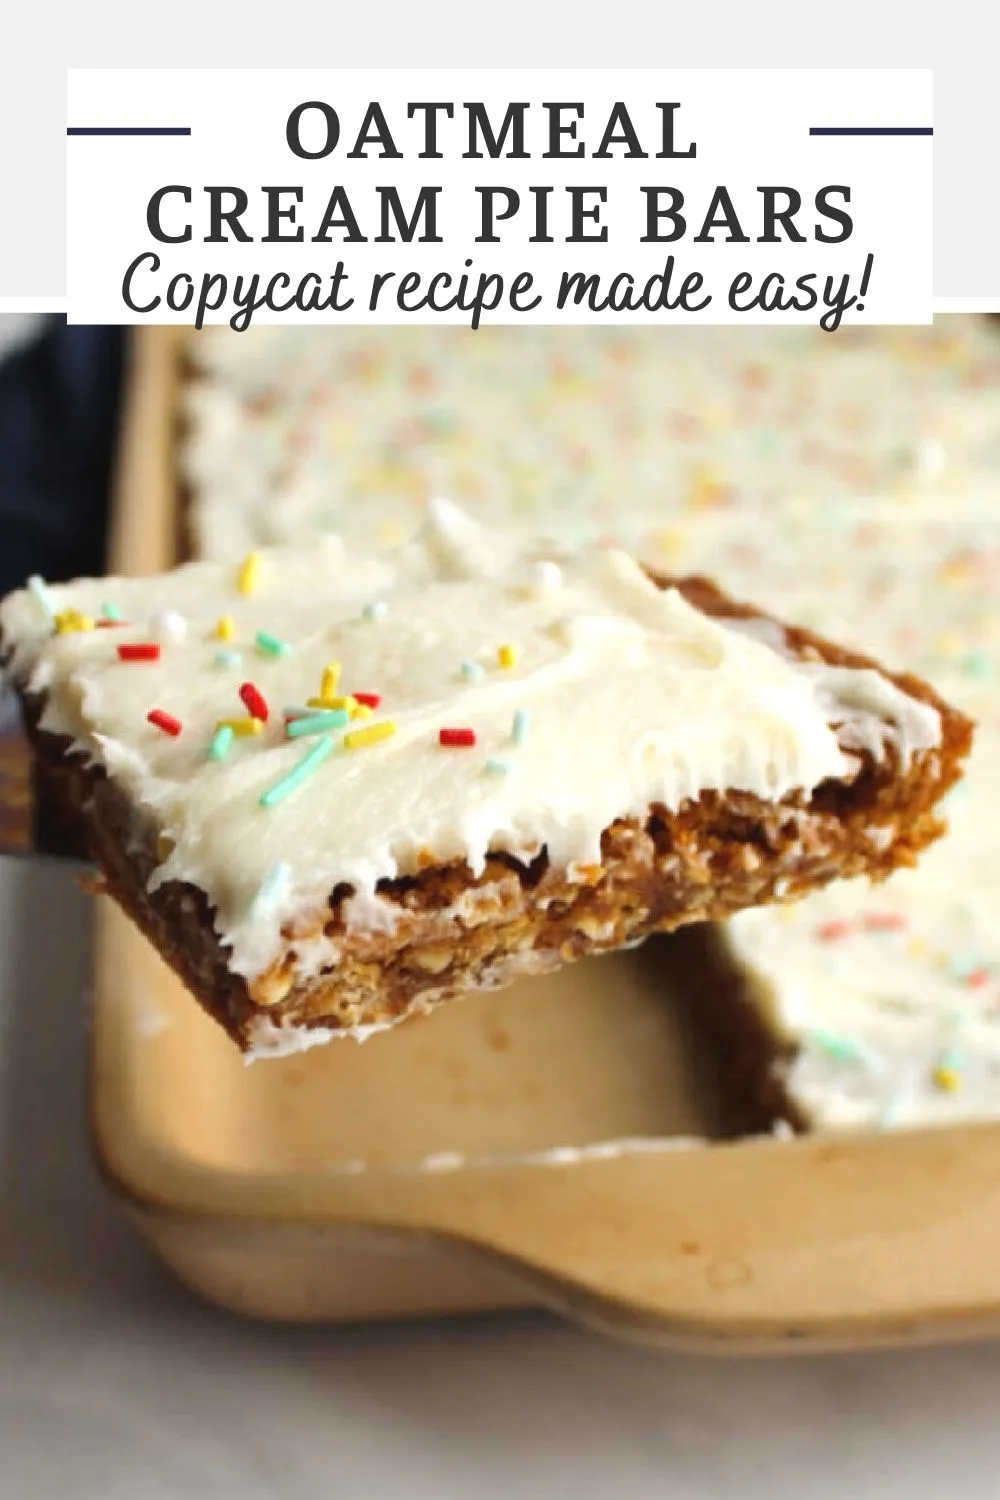 Oatmeal cream pie bars will remind you of the oatmeal creme pies you used to get in your lunchbox.  These chewy cookie bars are super easy to make and will give you a taste of childhood.